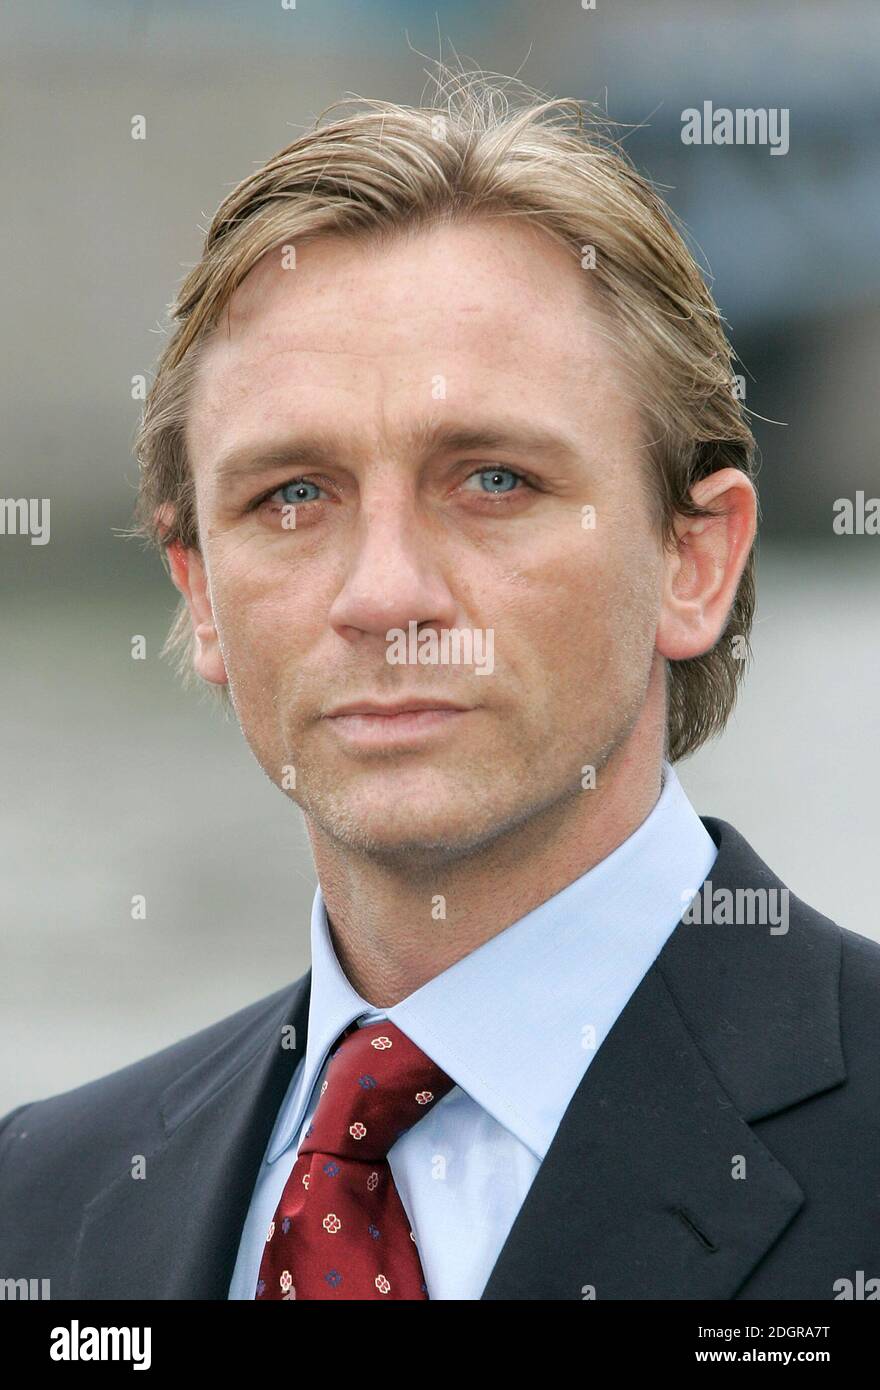 The announcement of actor Daniel Craig to play James Bond in the 21st 007 film Casino Royale, HMS President, London. Doug Peters/allactiondigital.com  Stock Photo